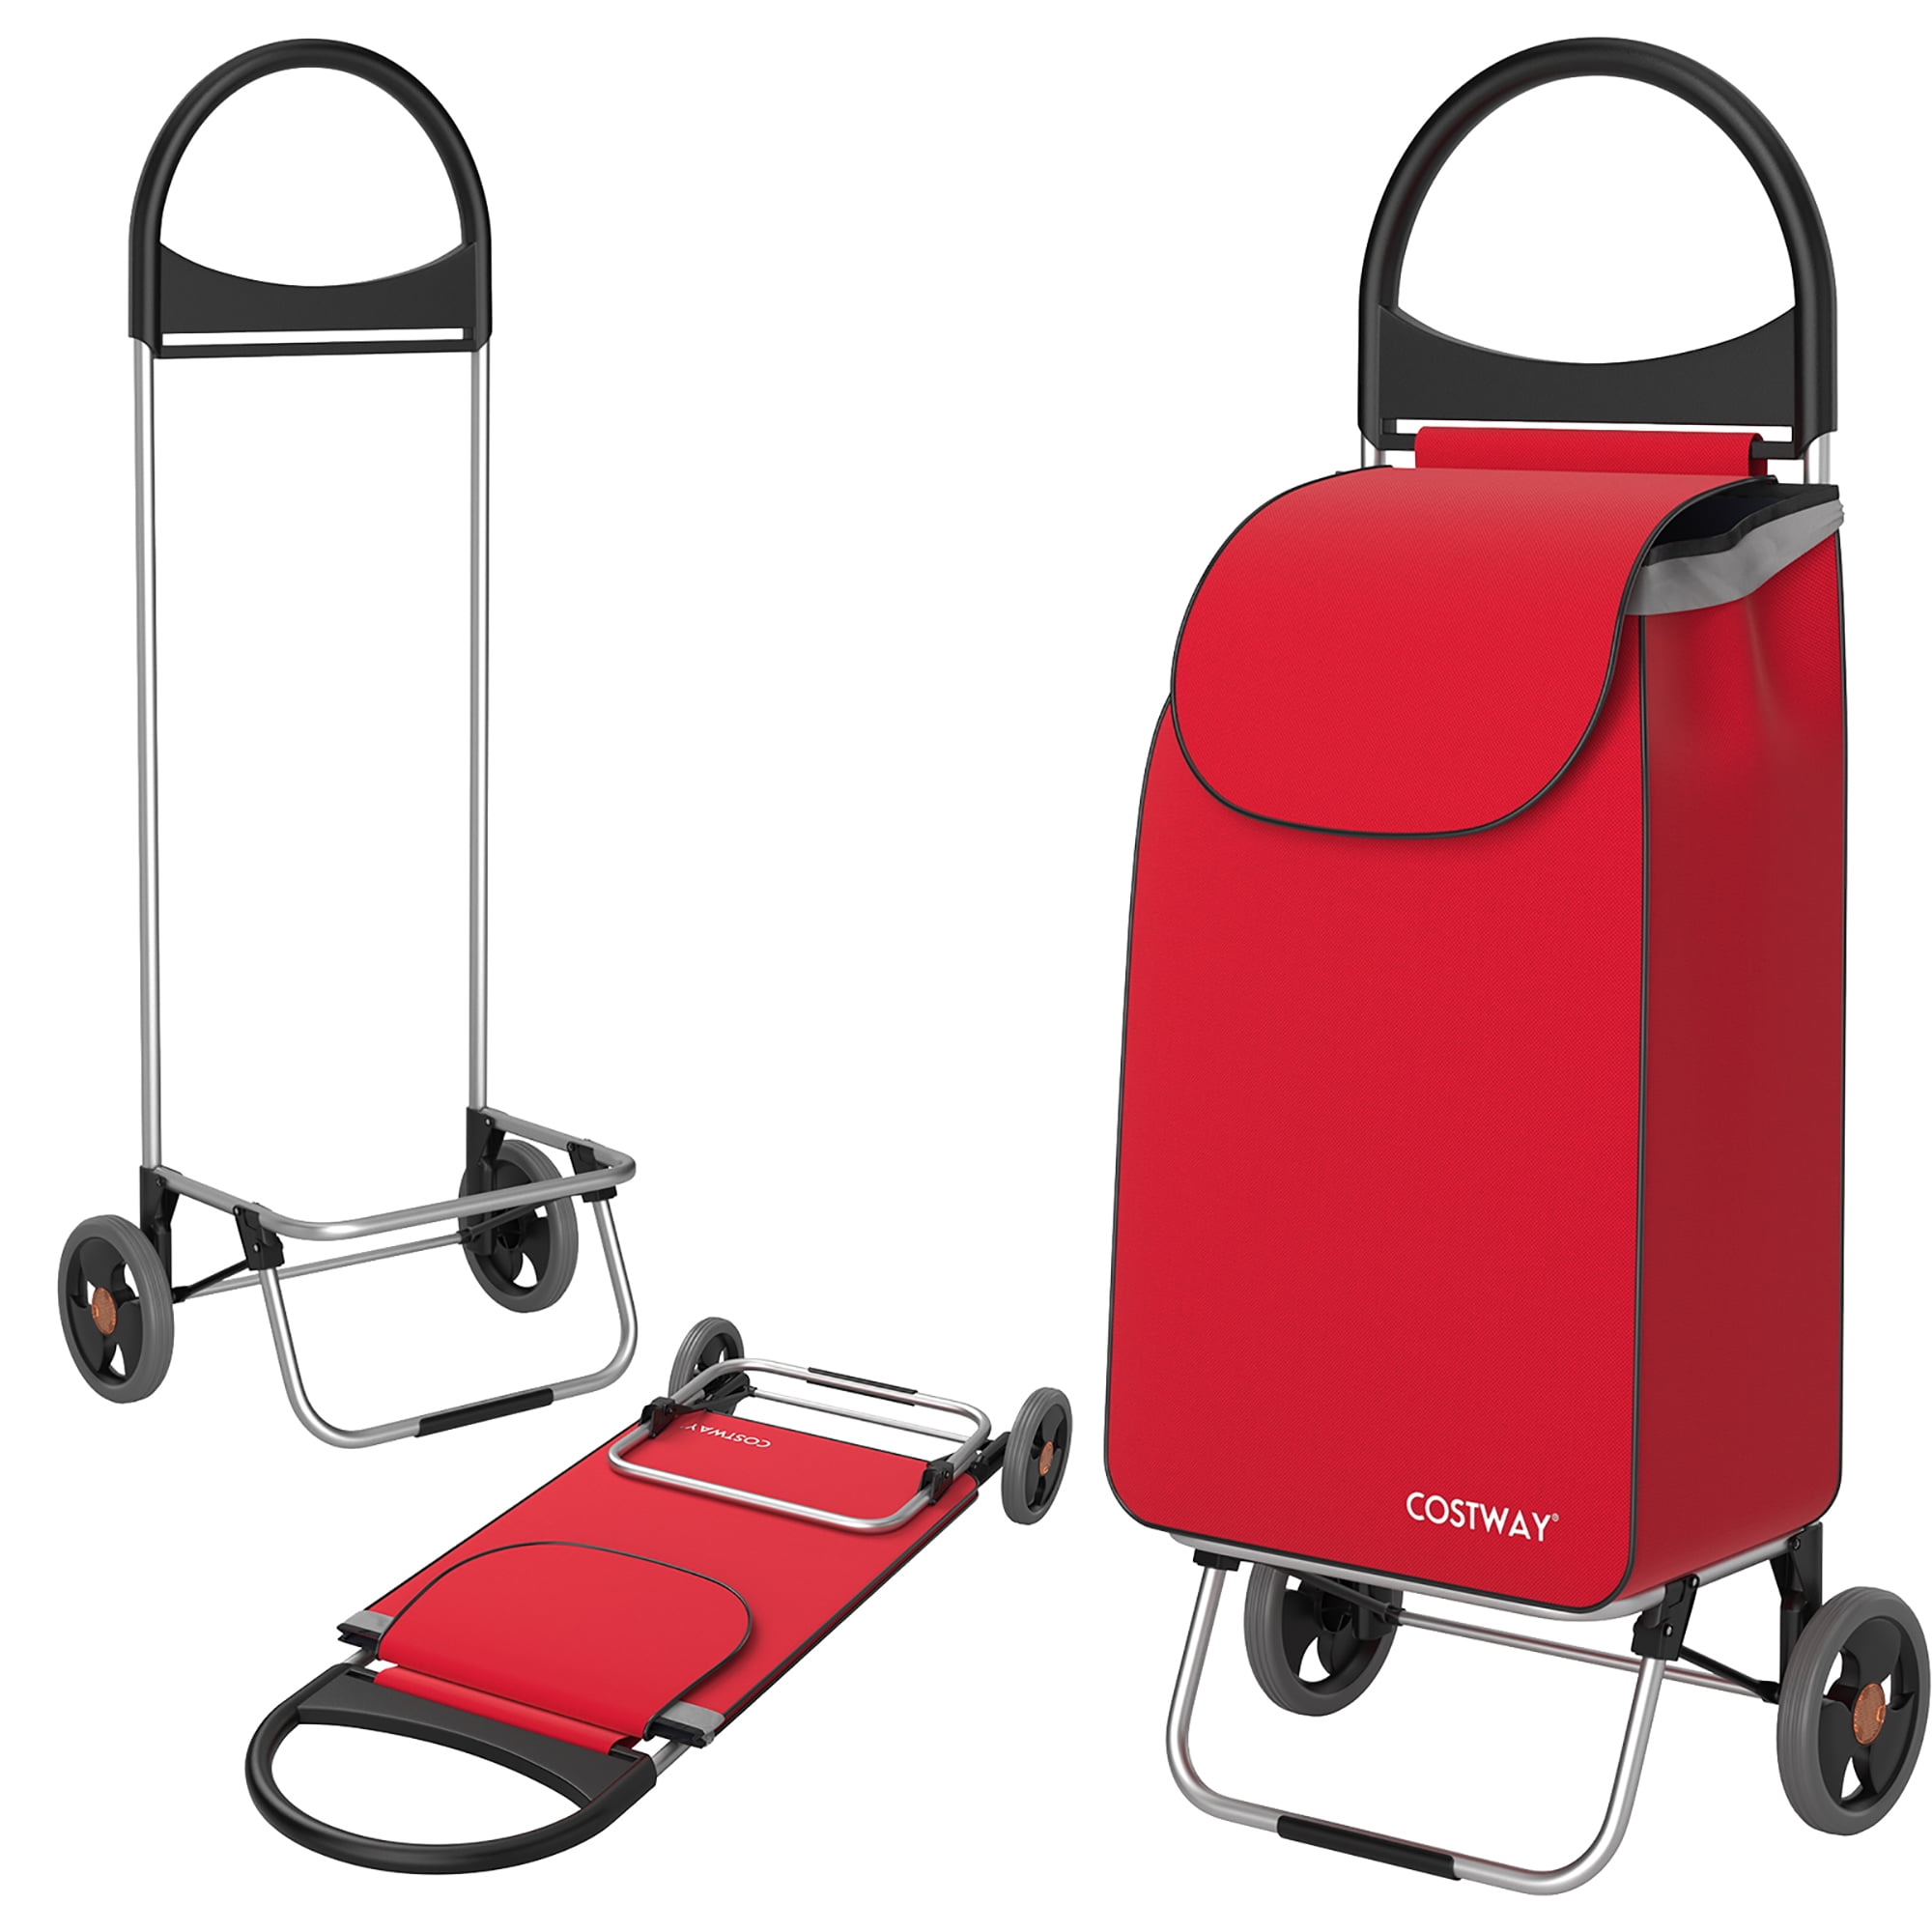 MPM Foldable Hand Truck and Dolly Cart, Aluminum Luggage Trolley